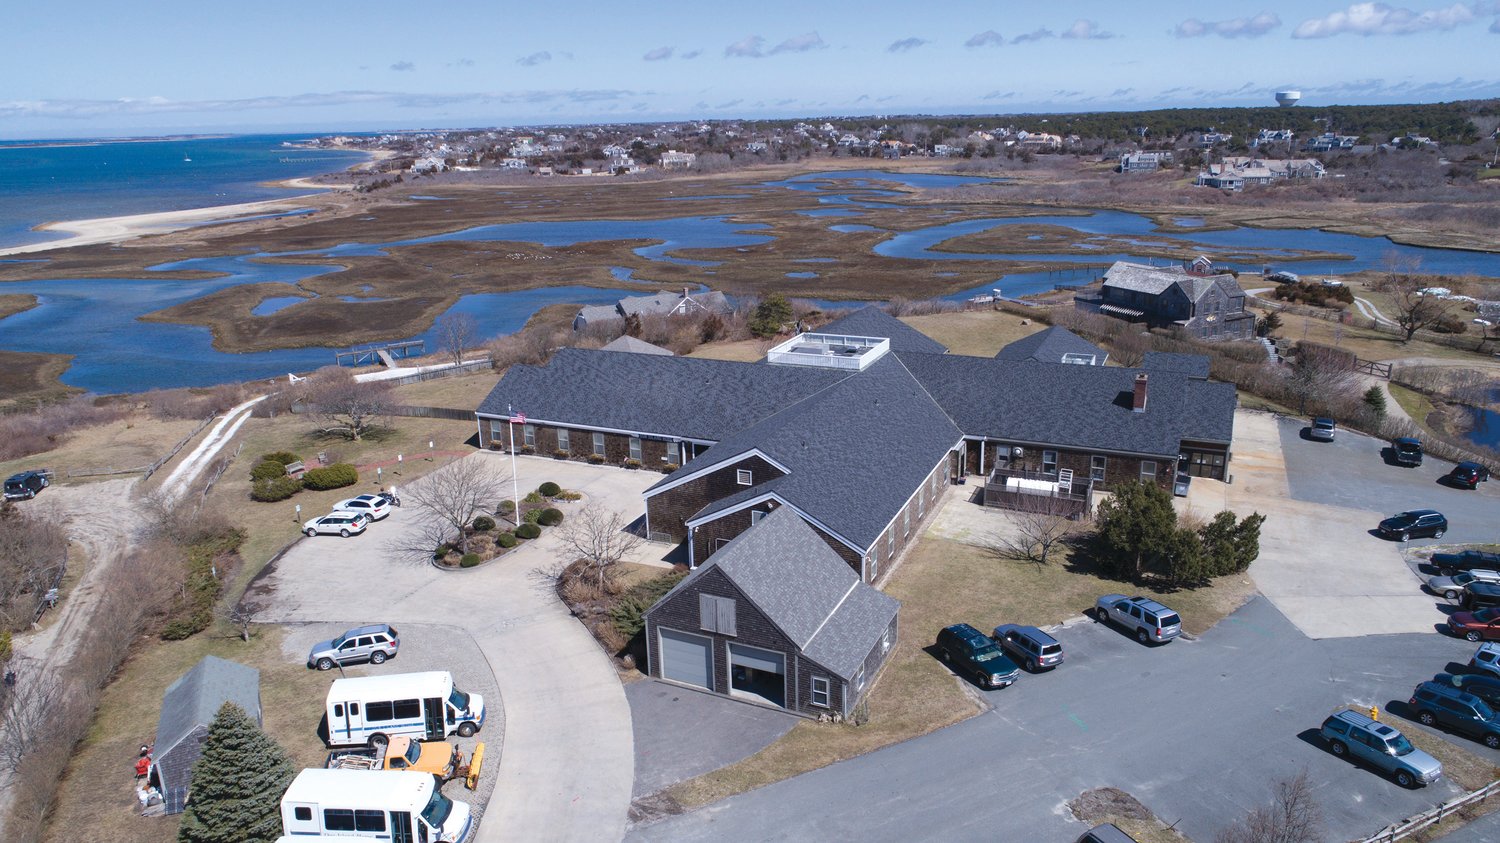 An aerial view of Our Island Home, overlooking the Creeks. The town plans to construct a new assisted nursing facility near Sherburne Commons and renovate this building for a new senior center.